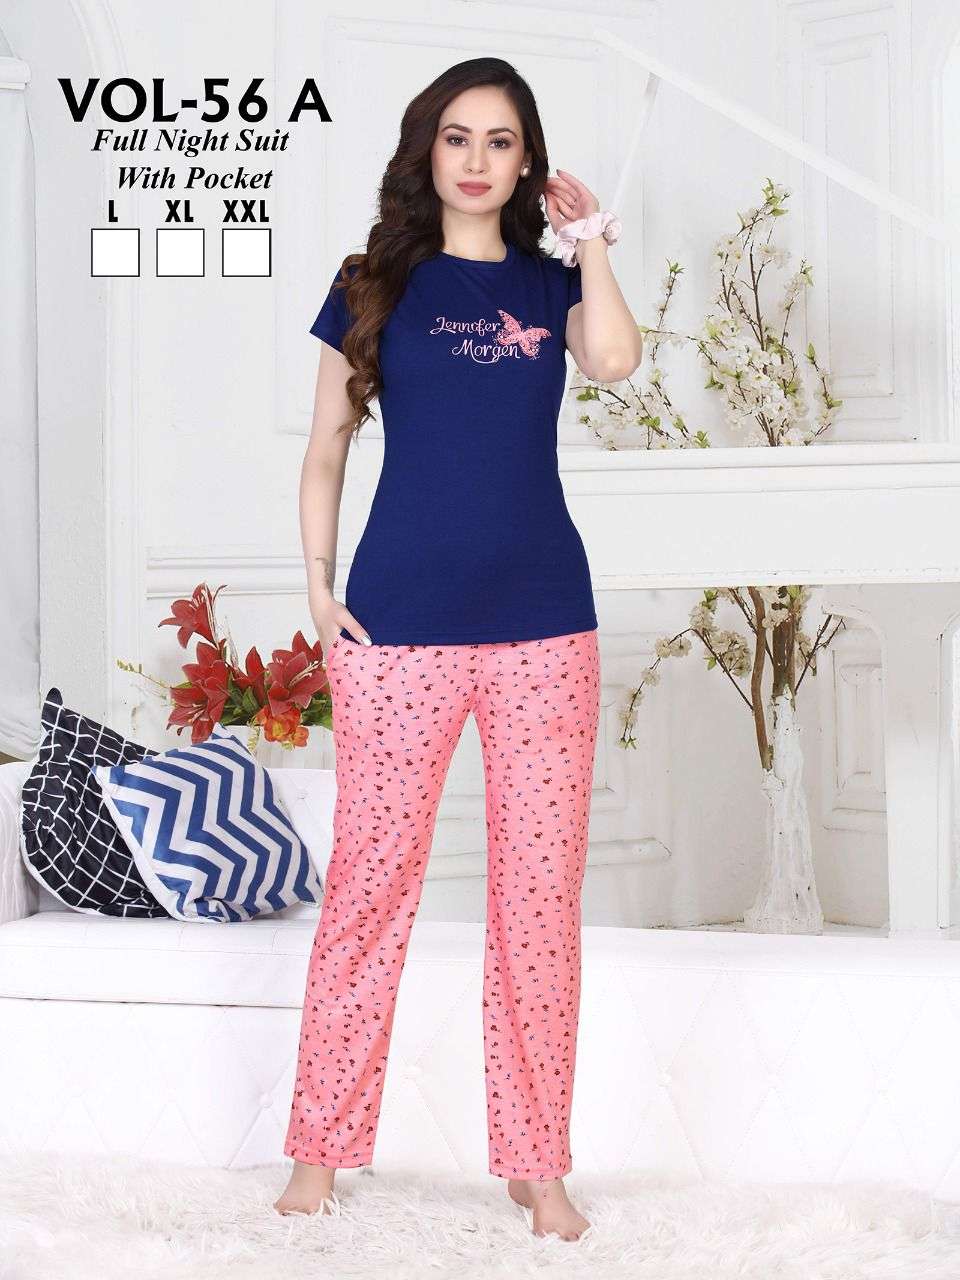 PLATINUM VOL.56 A Heavy Shinker Hosiery Cotton Night Suits With Pocket CATALOG WHOLESALER BEST RATE